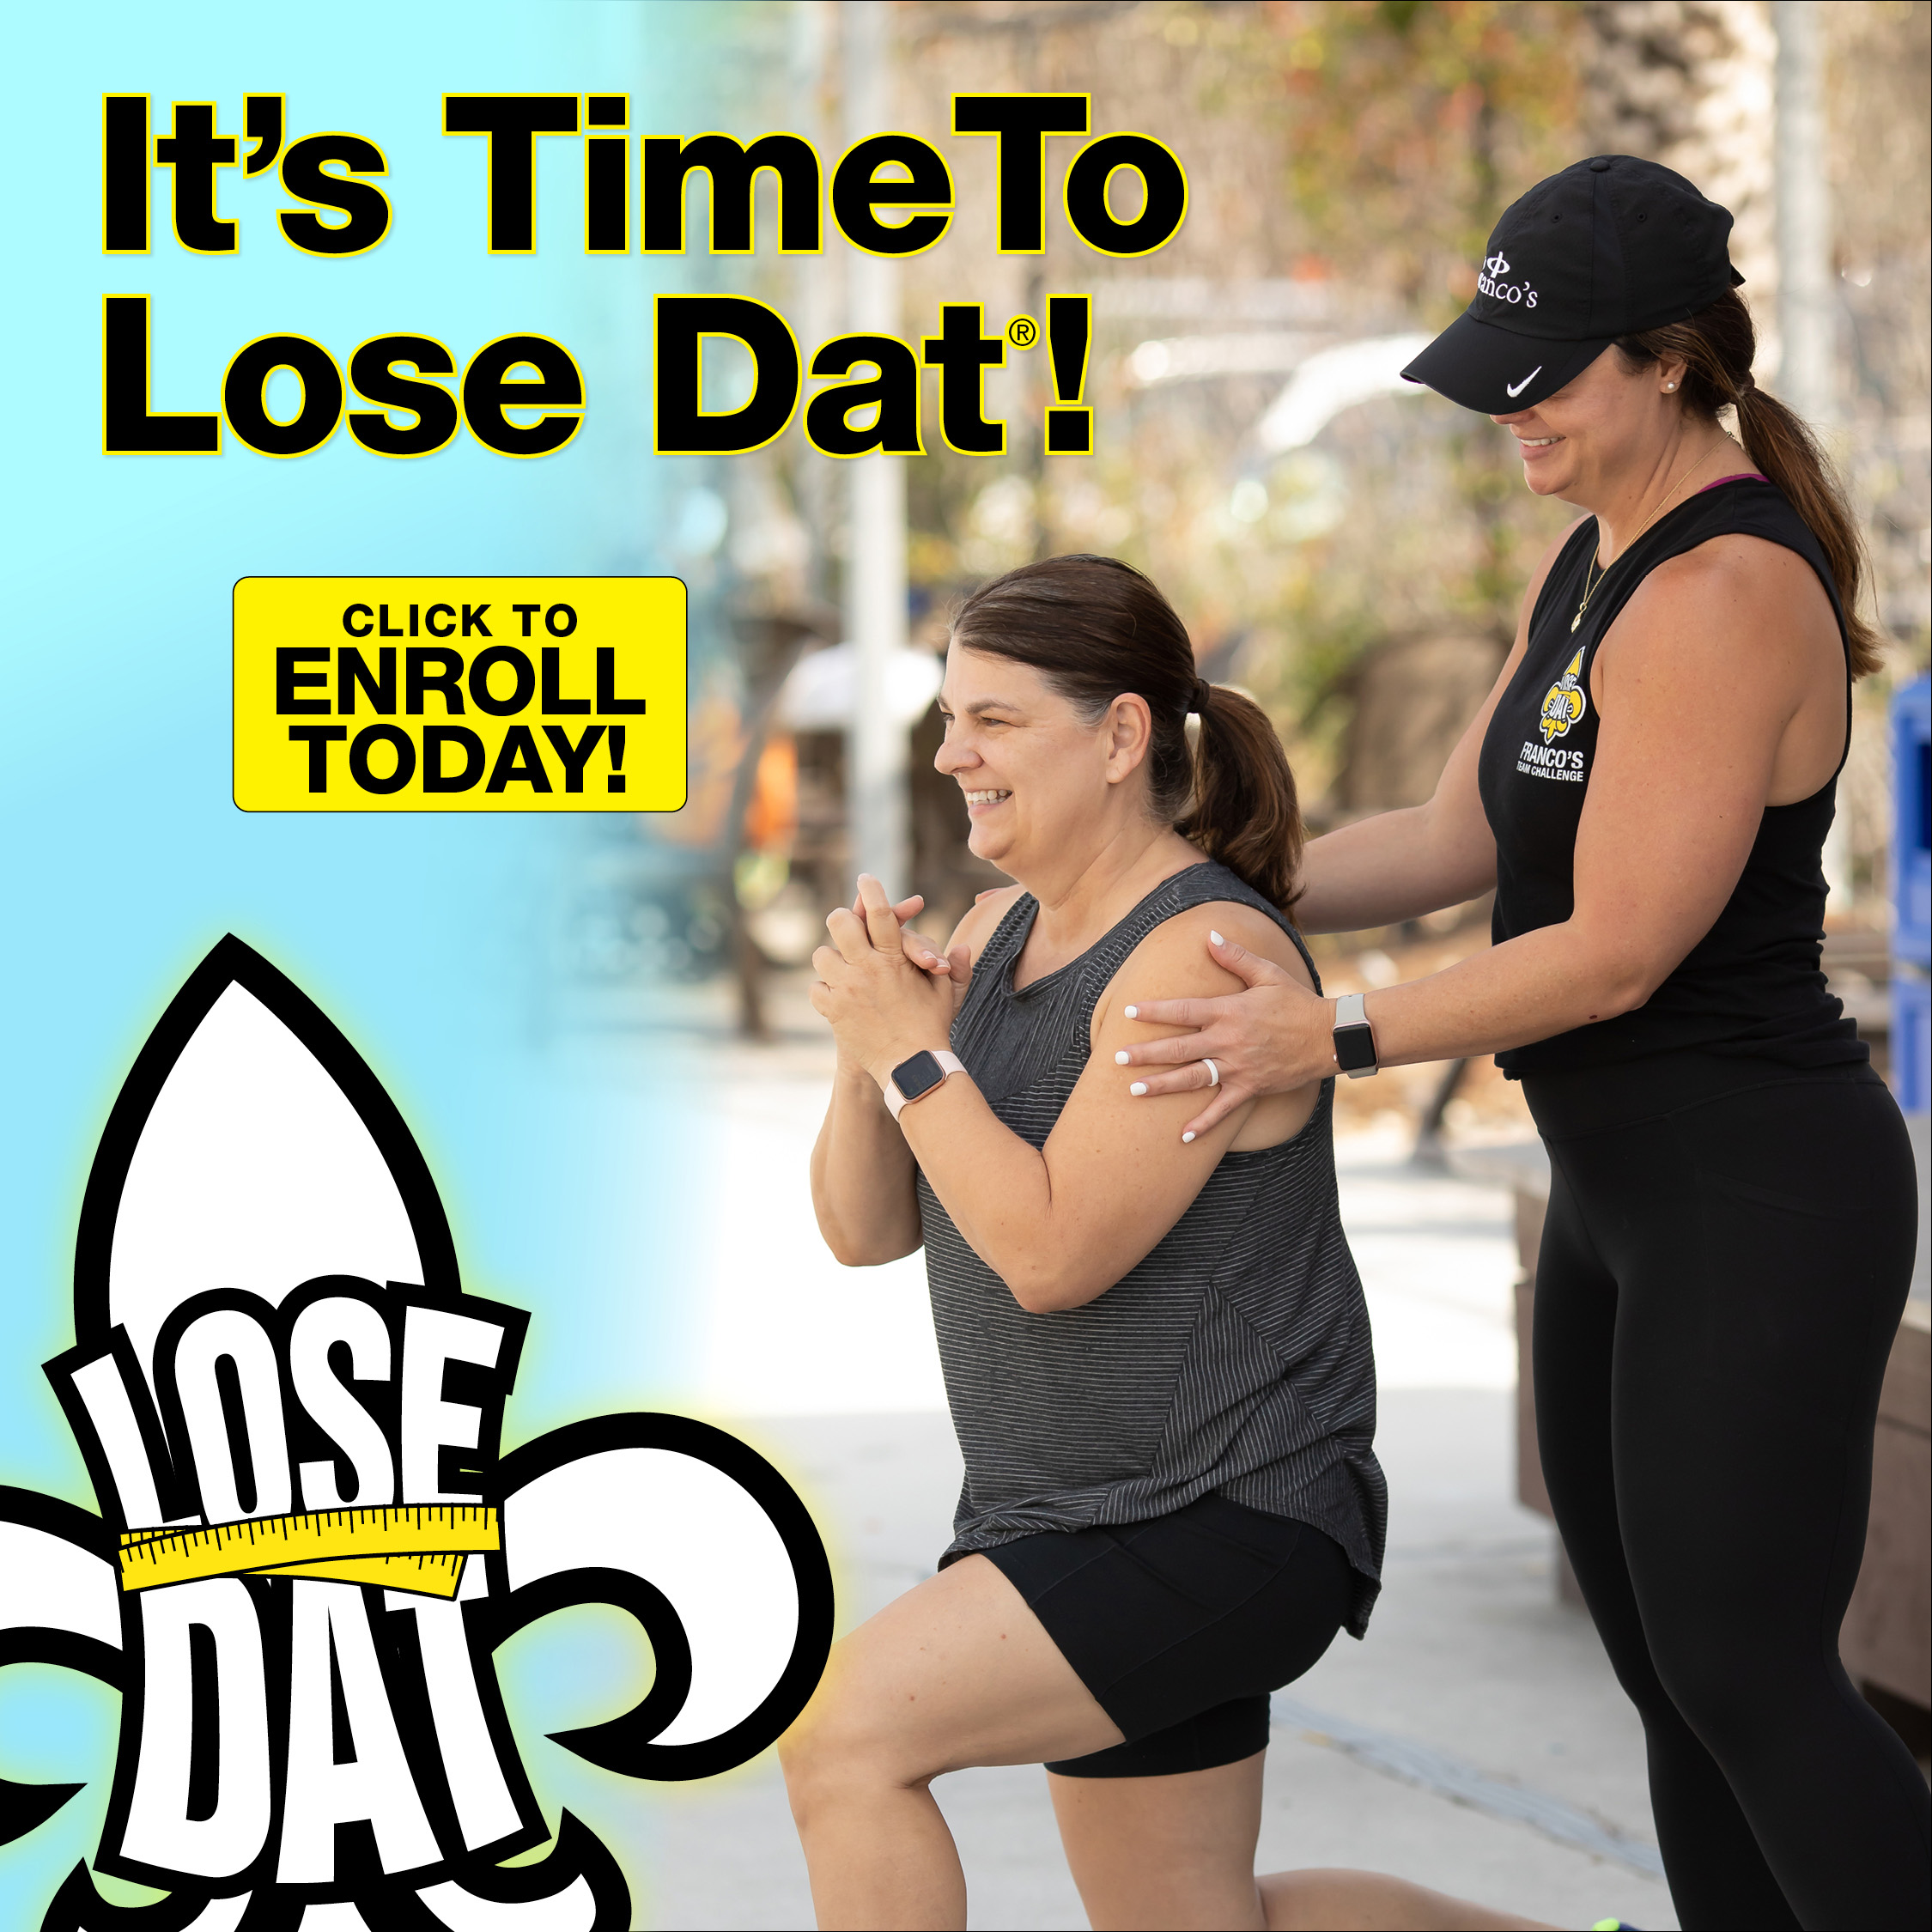 It's Time To Lose Dat! Click To Enroll Today!